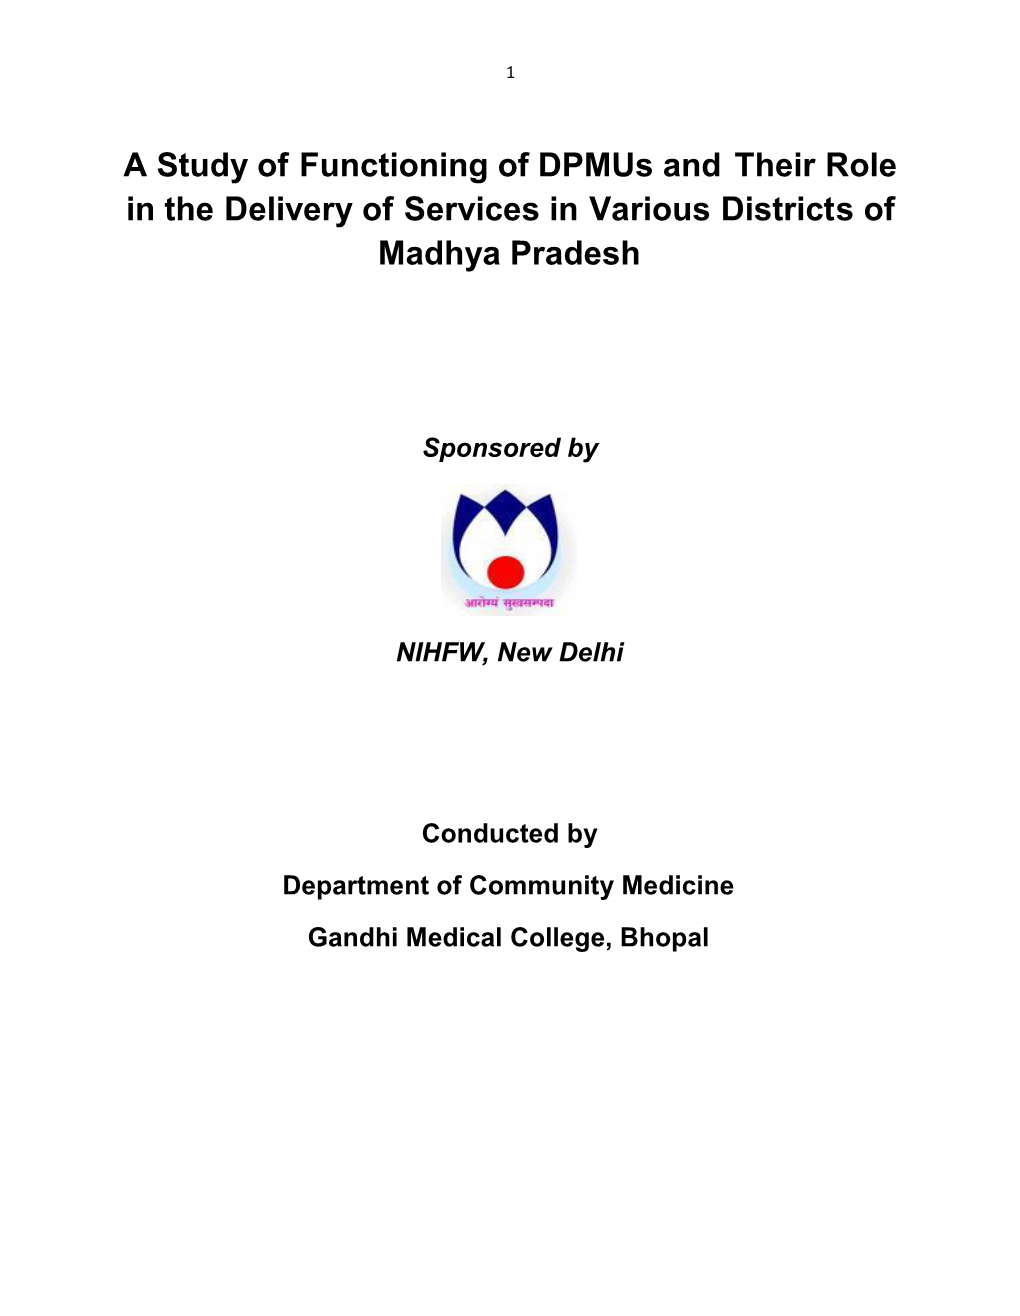 A Study of Functioning of Dpmus and Their Role in the Delivery of Services in Various Districts of Madhya Pradesh